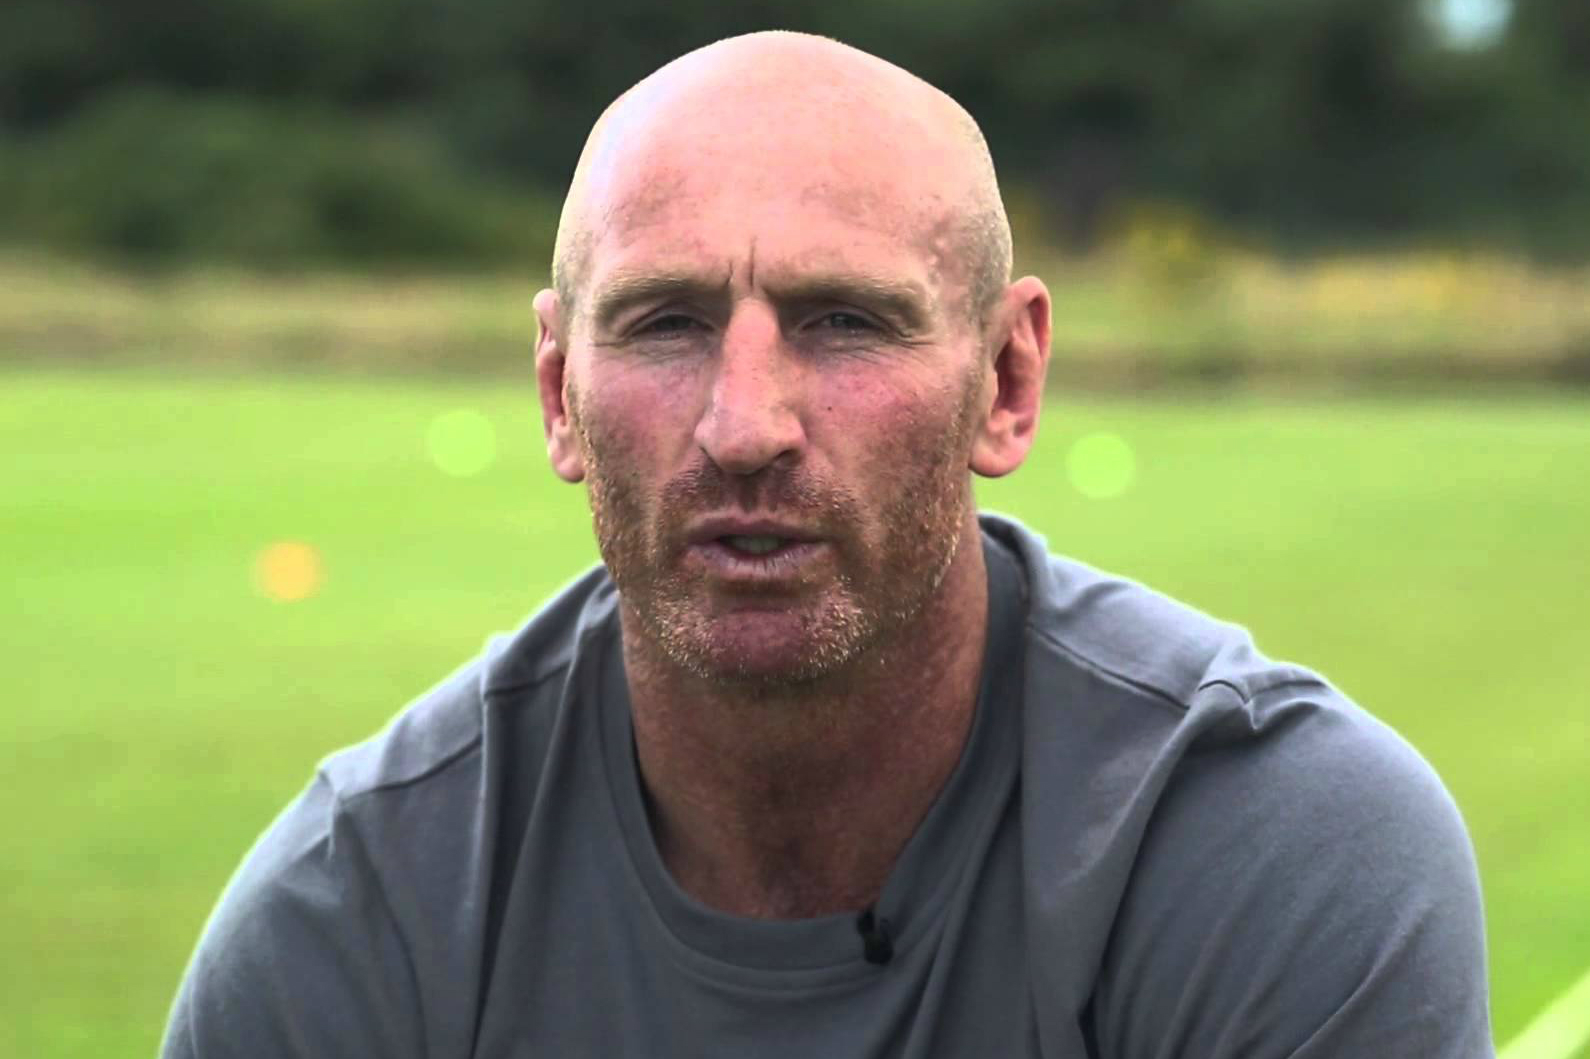 Gareth Thomas, who came out as gay in 2009